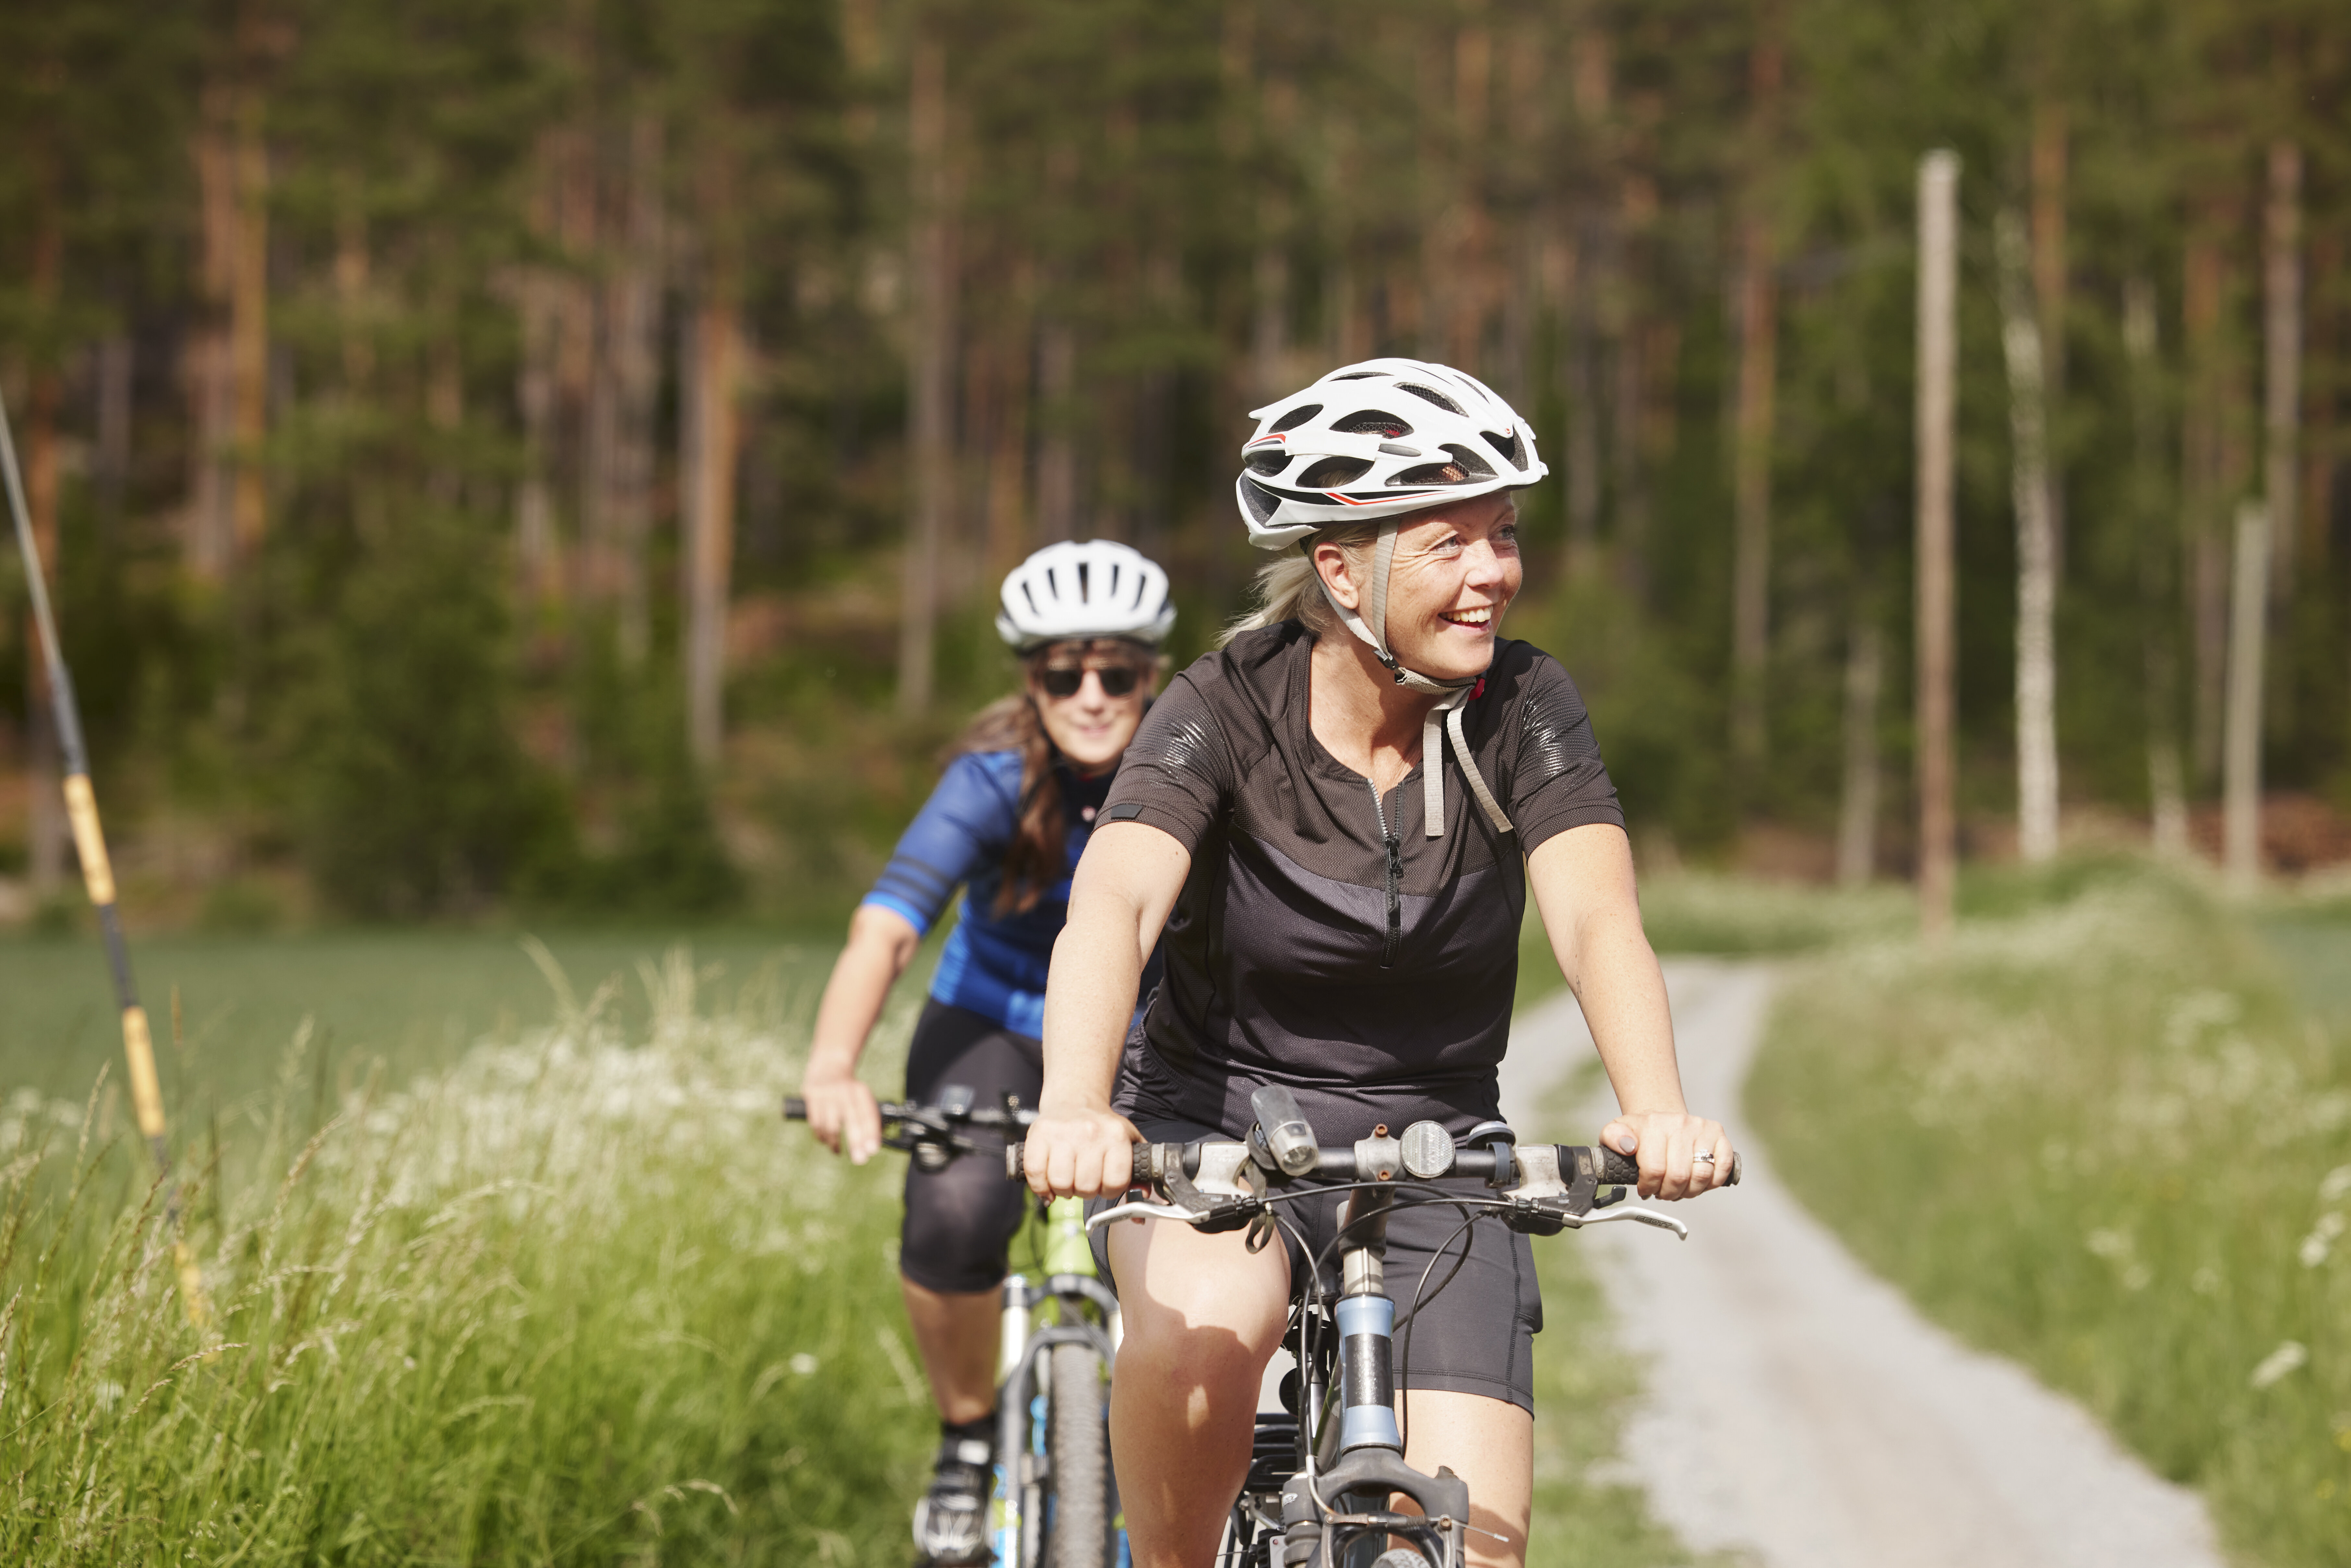 Two women riding bicycles on a countryside path, both wearing helmets and cycling gear, with a forest in the background